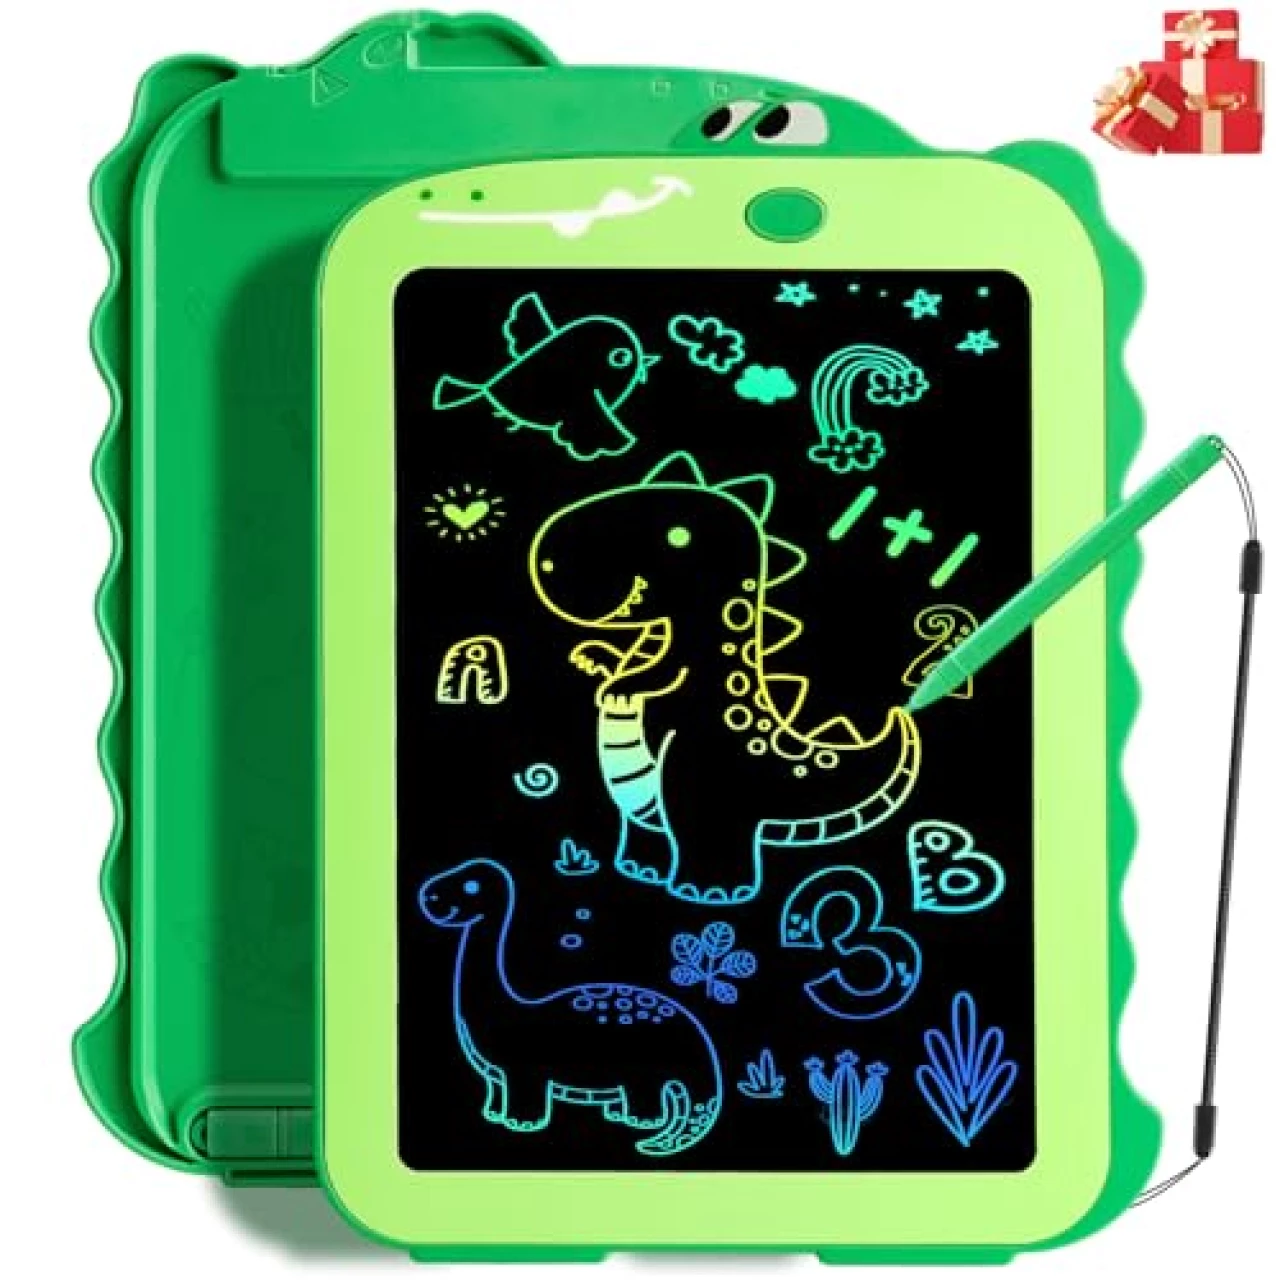 Teriph LCD Writing Tablet for Kids, Colorful Toddlers Toys Drawing Board, Educational Kid Toys, Doodle Pad Dinosaur Toys for 2 3 4 5 6 7 8 Year Old Boys Girls Christmas Birthday Gifts,8.5inch